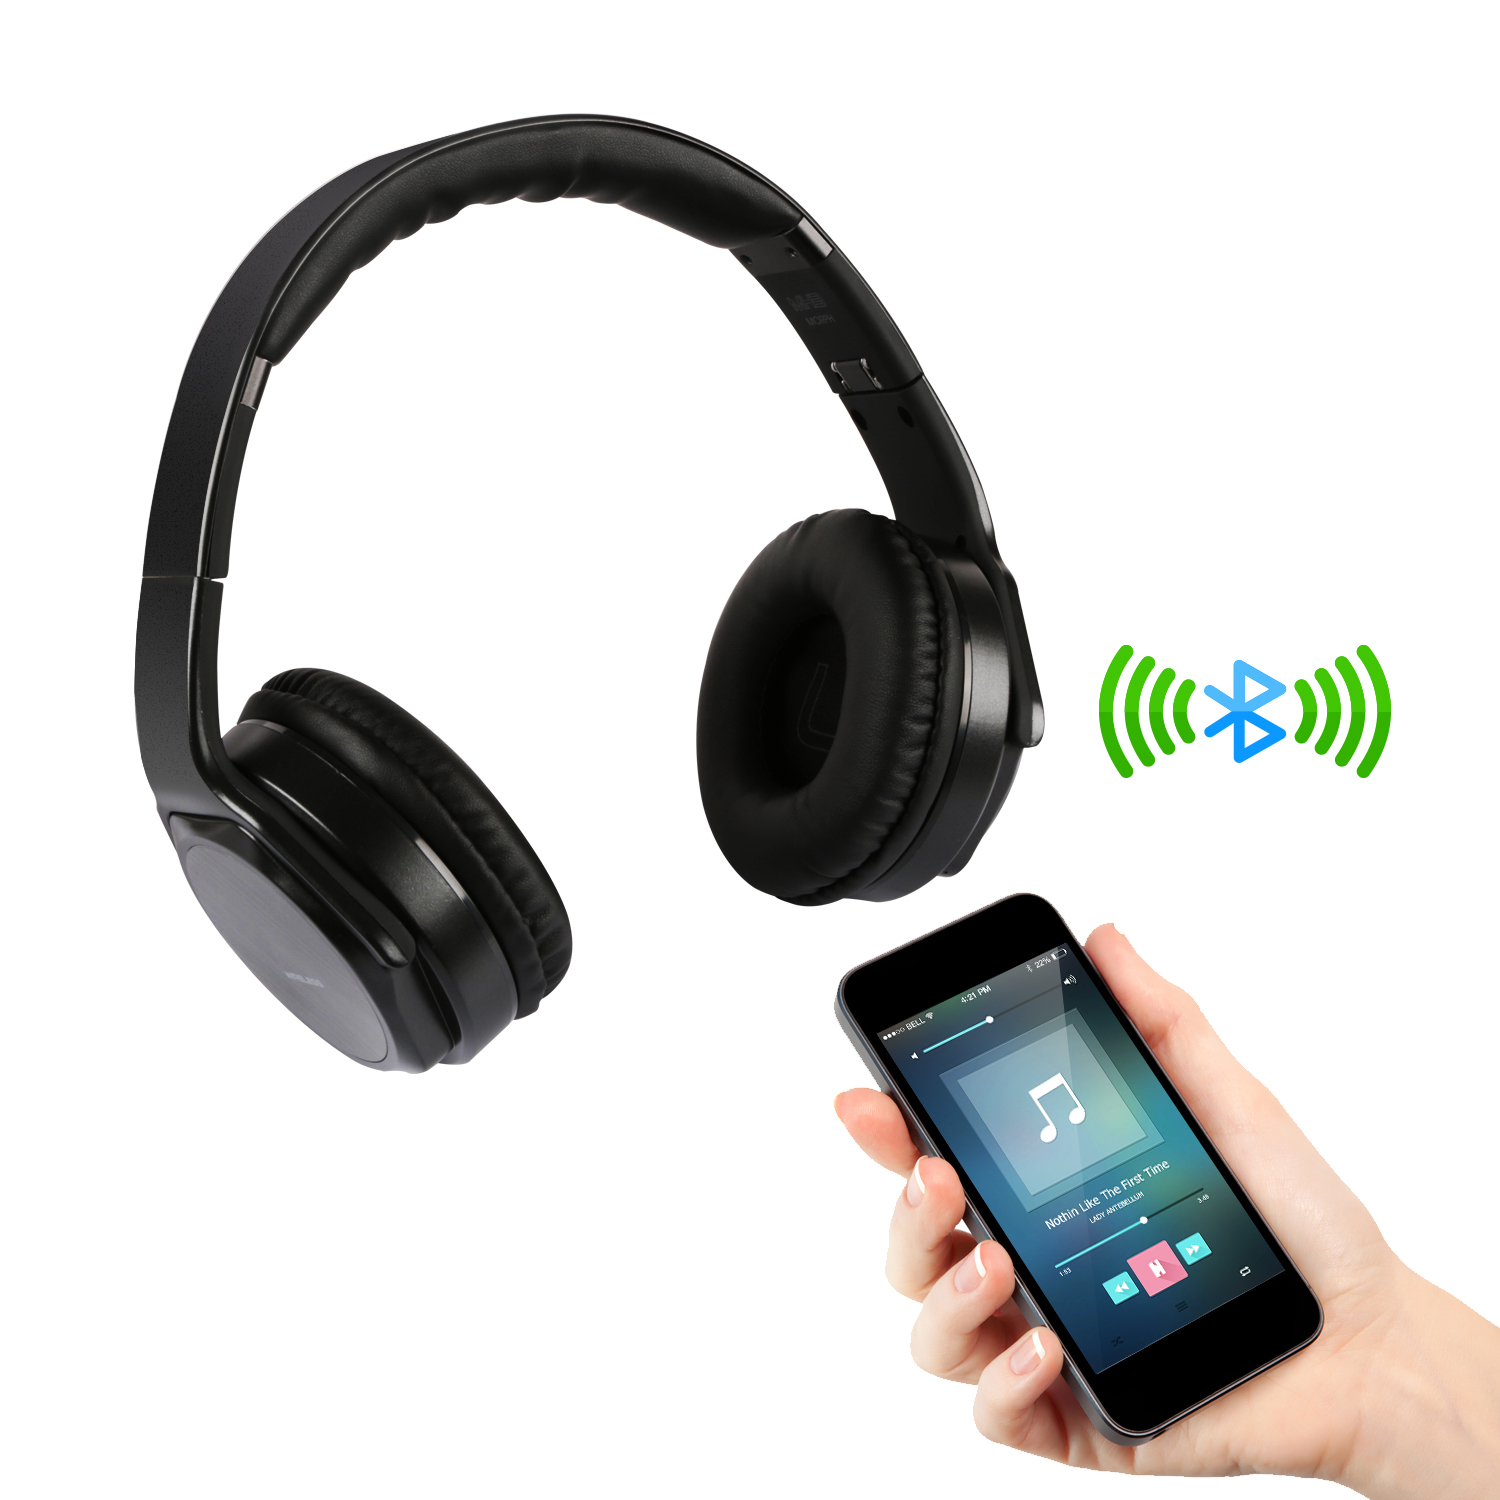 KOCASO HP-530 [Wireless / Foldable] Headphones With Built-in Speaker Mode - image 1 of 9